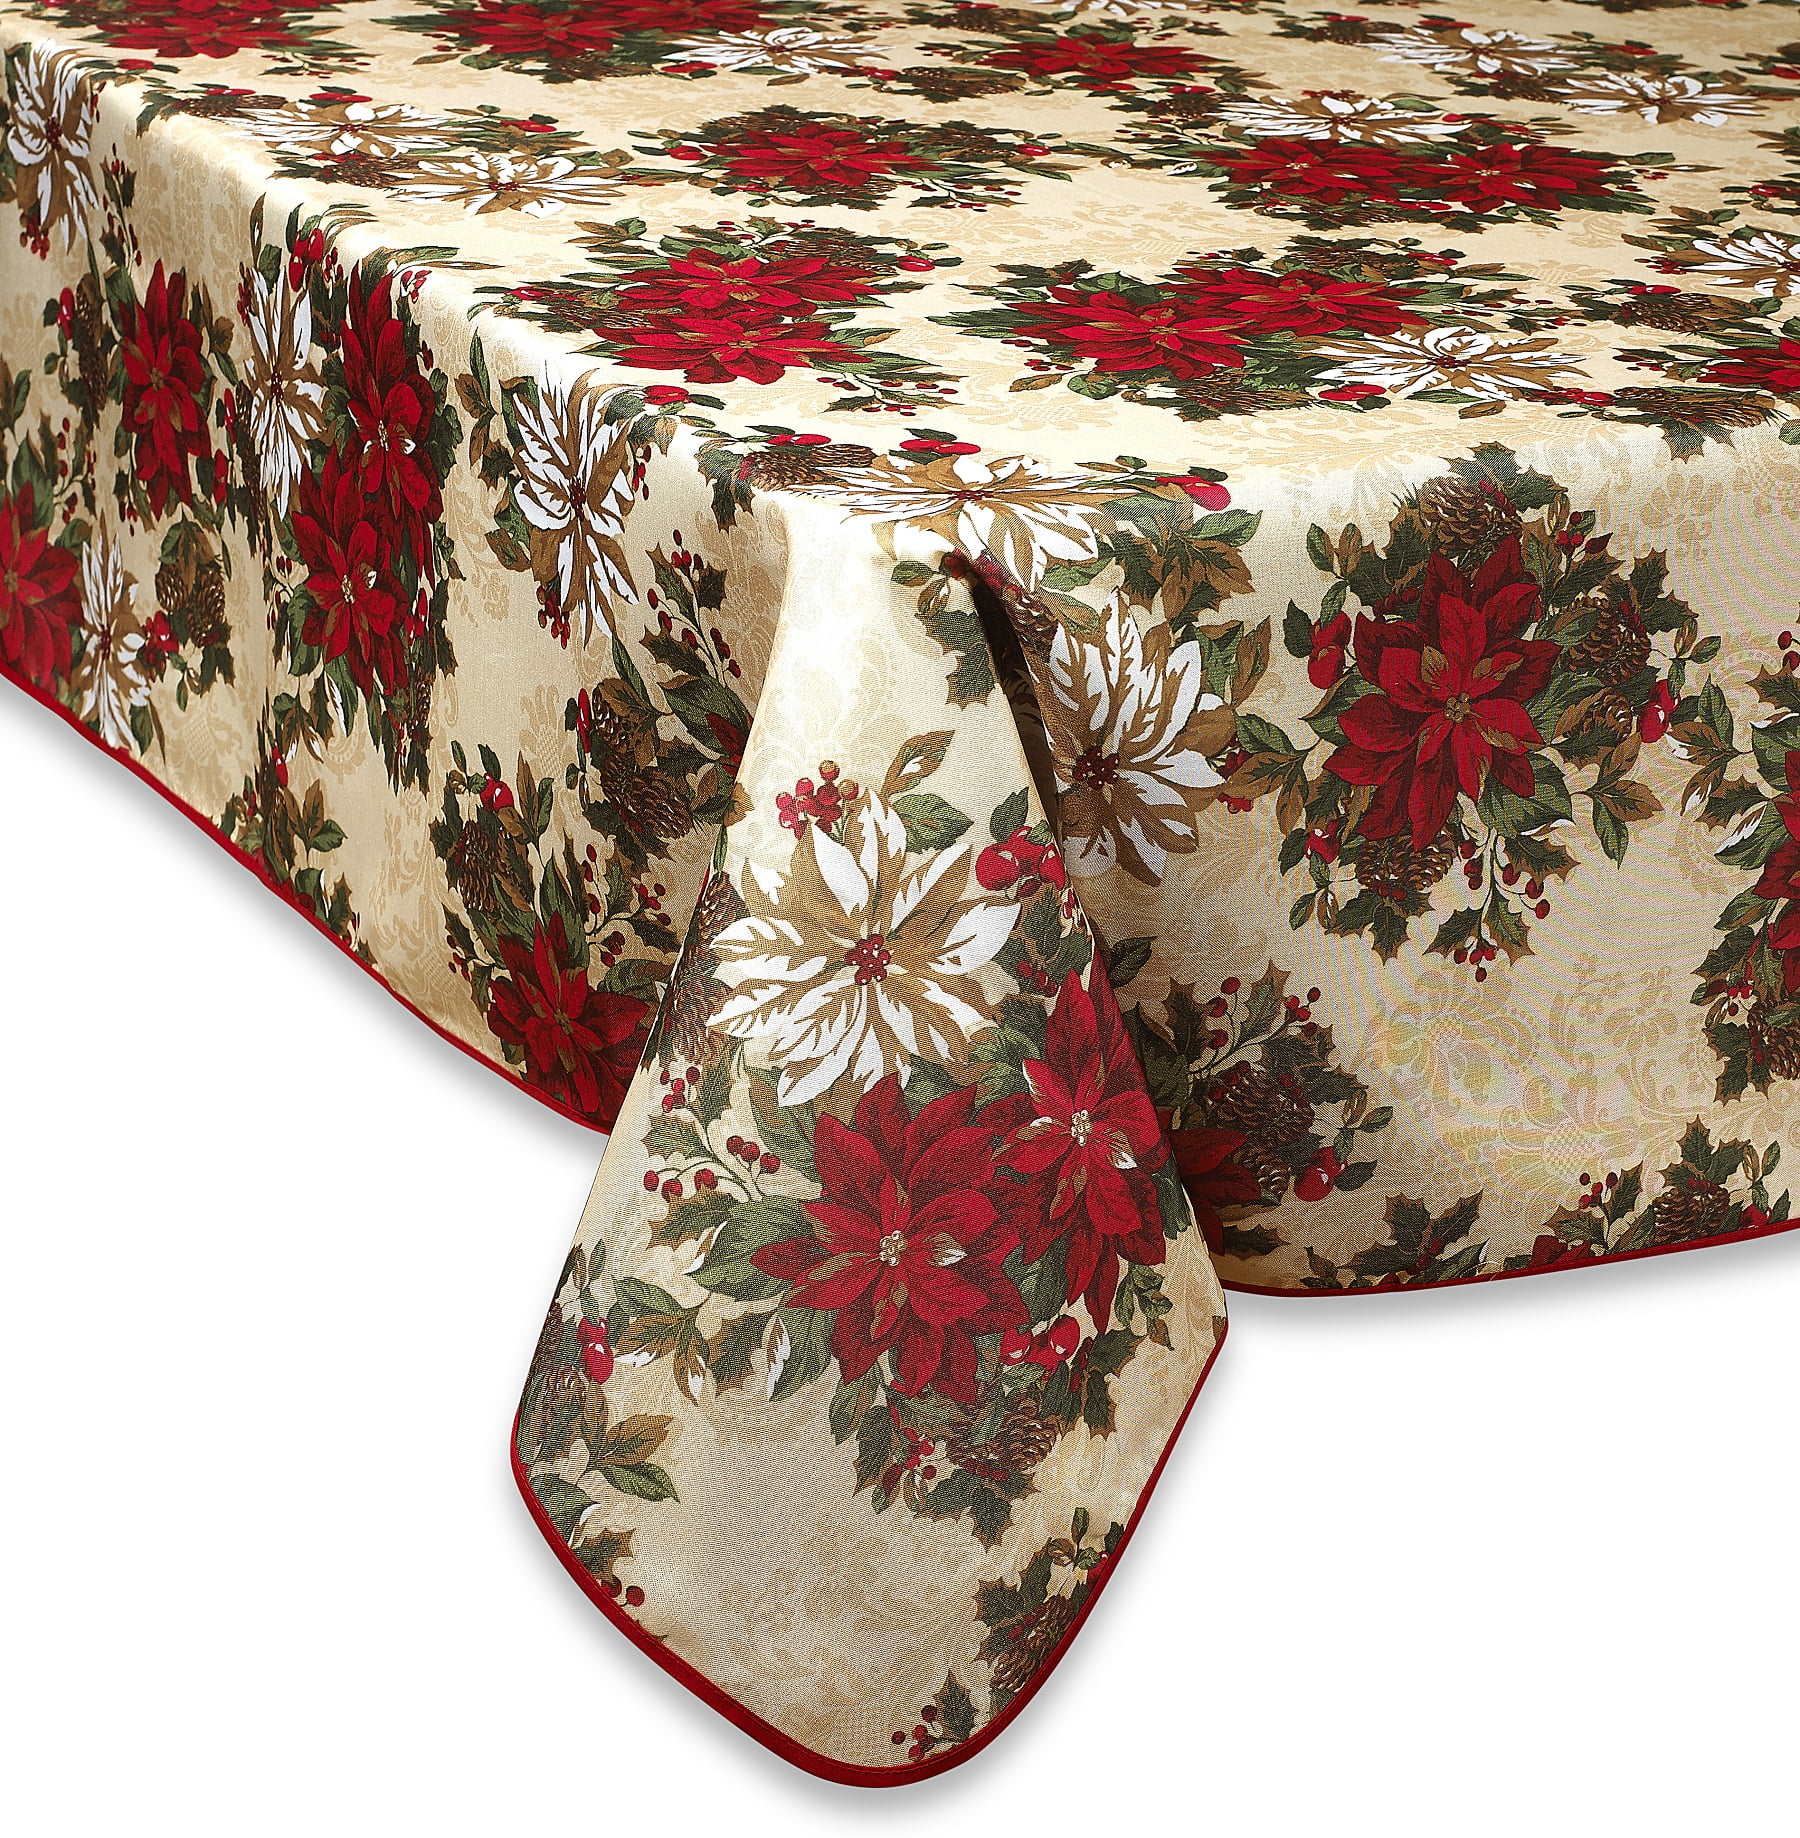 Christmas Holly Poinsettia Plant Party Tablecloth Cotton Linens Table Covers for Kitchen Dinning Wedding Decoration Stain/Wrinkle Resistant Washable HELLOWINK Square/Round Table Cloths 54x54inch